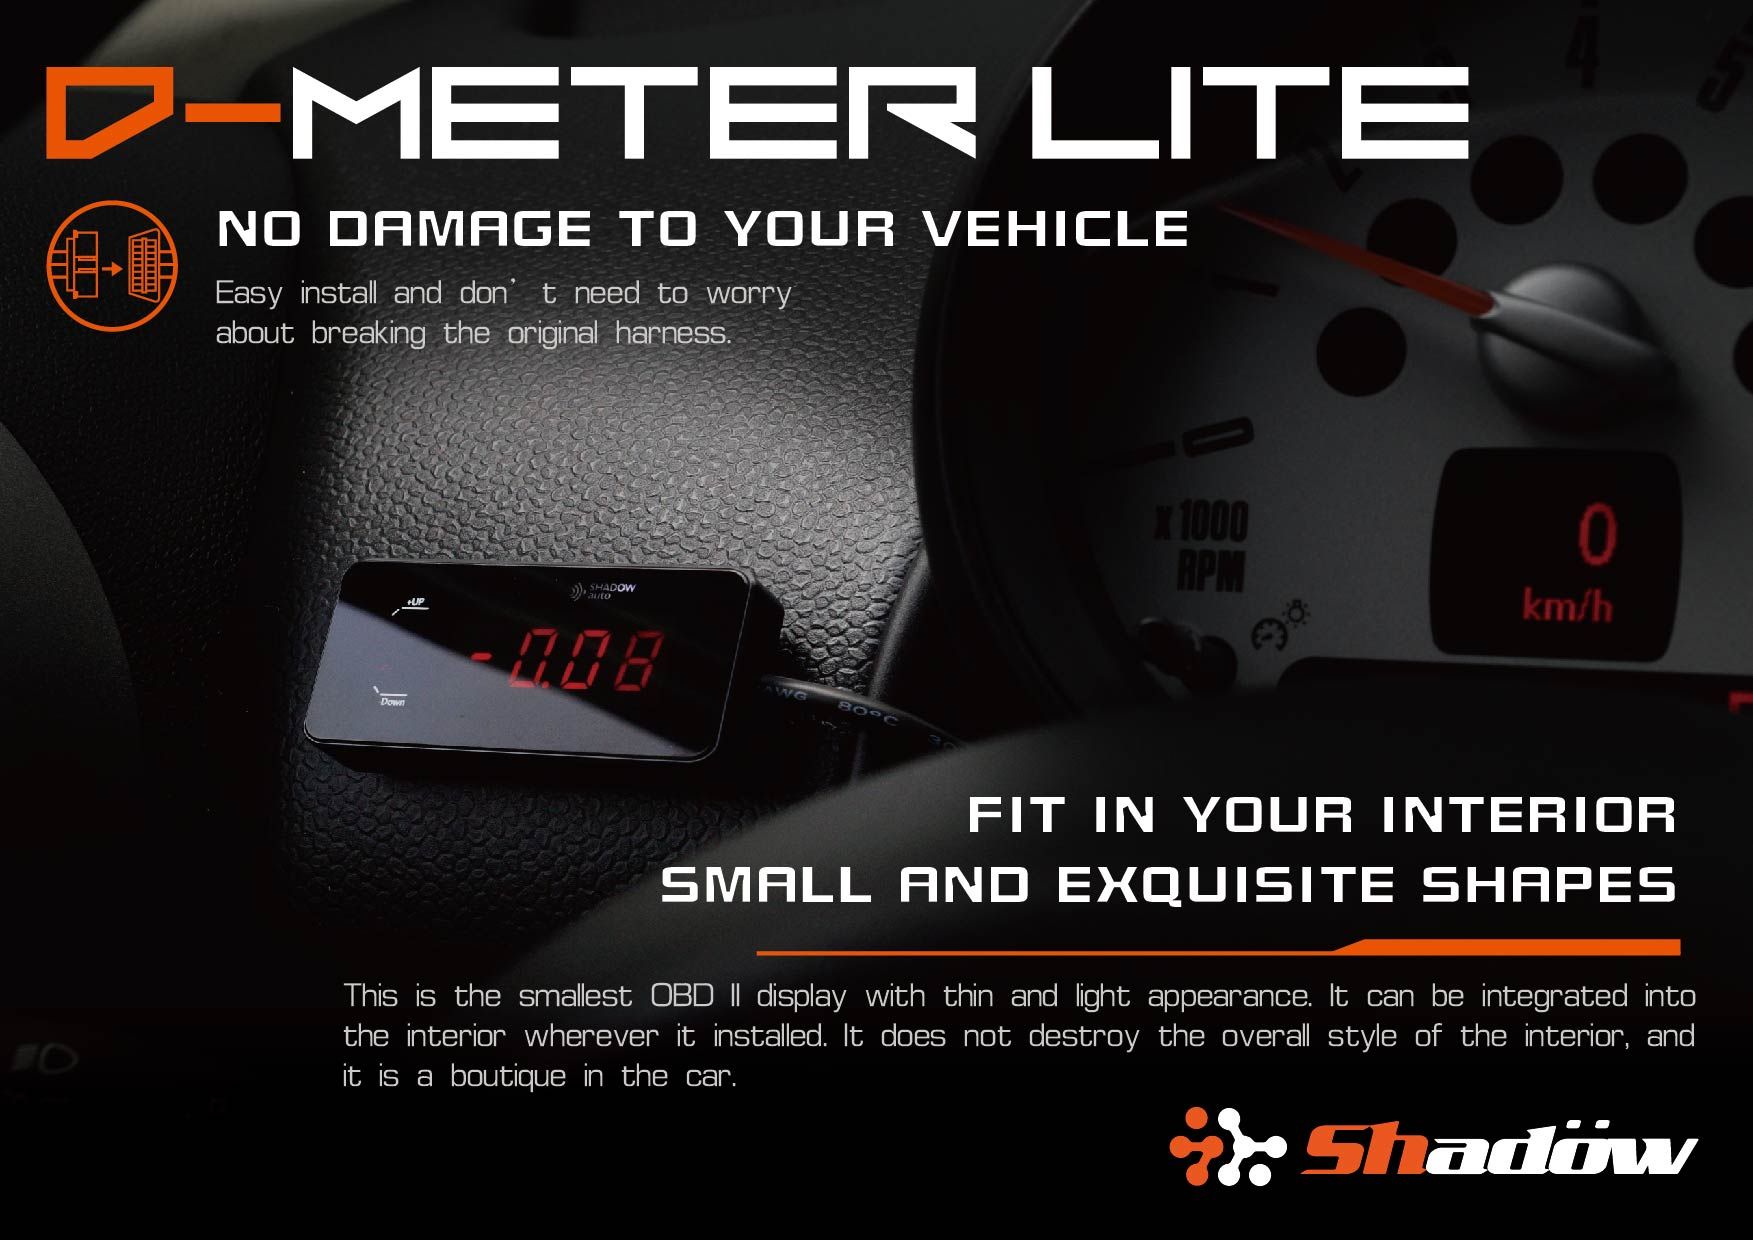 D-meter has feature of NO DAMAGE to vehicle